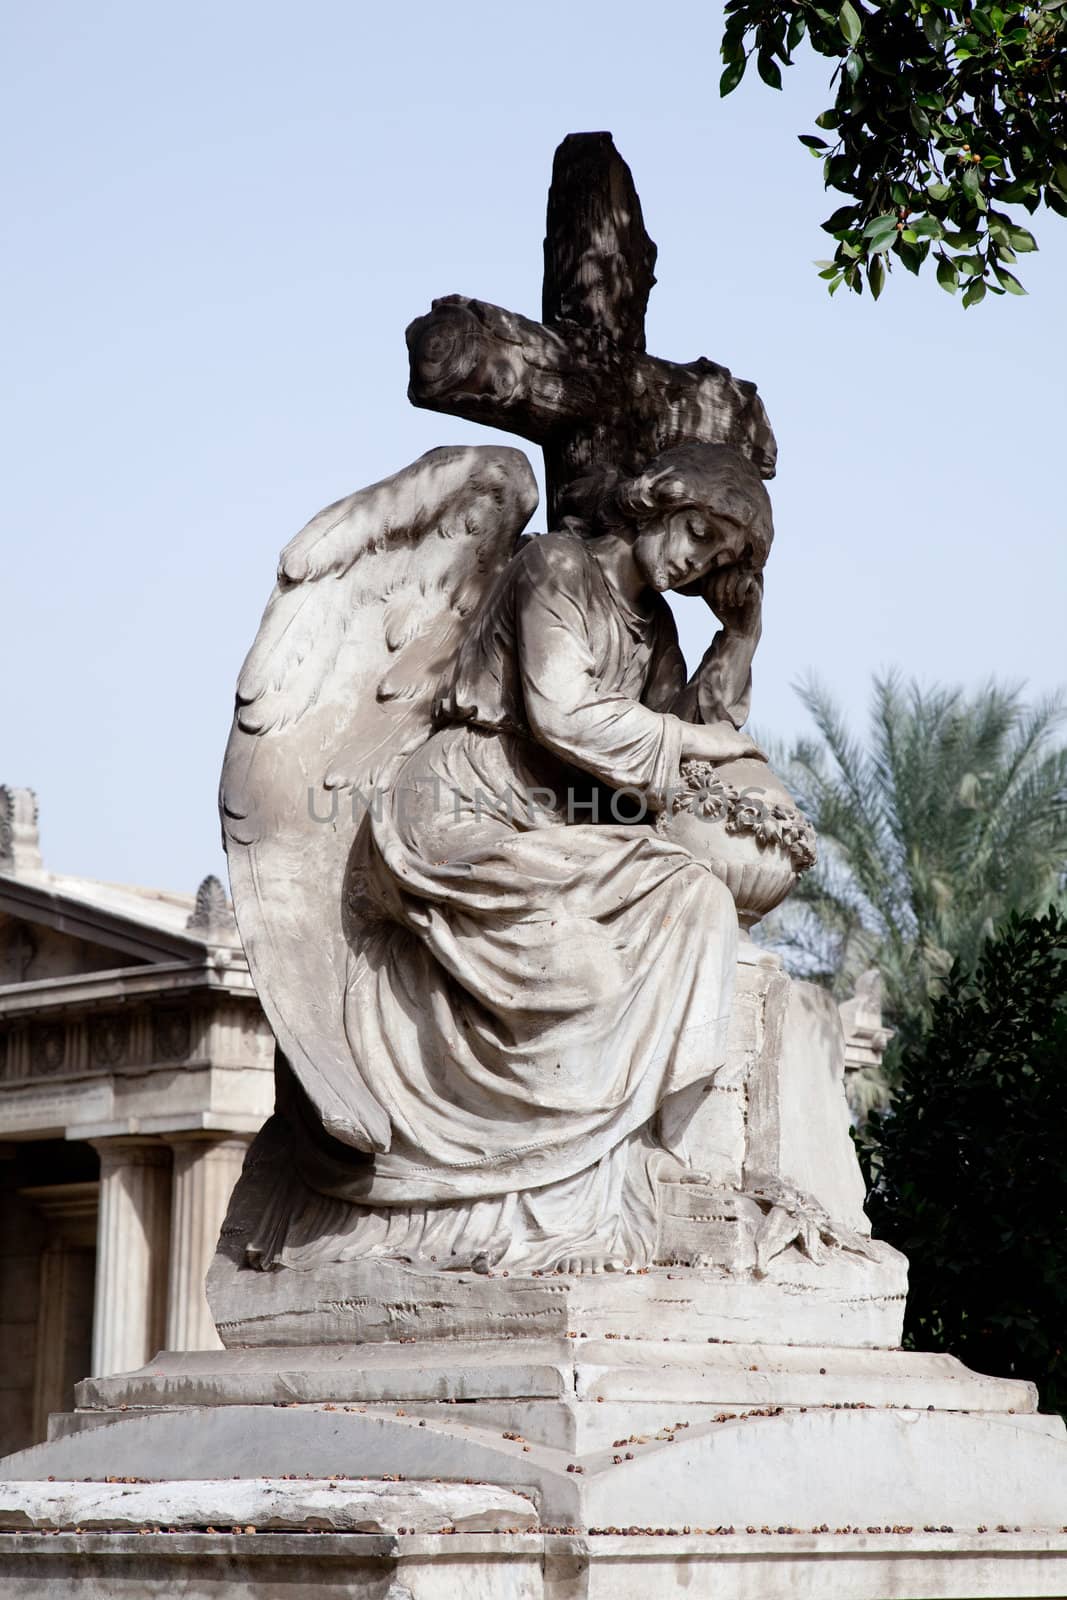 Angel statue on Coptic Christian building in Cairo, Egypt